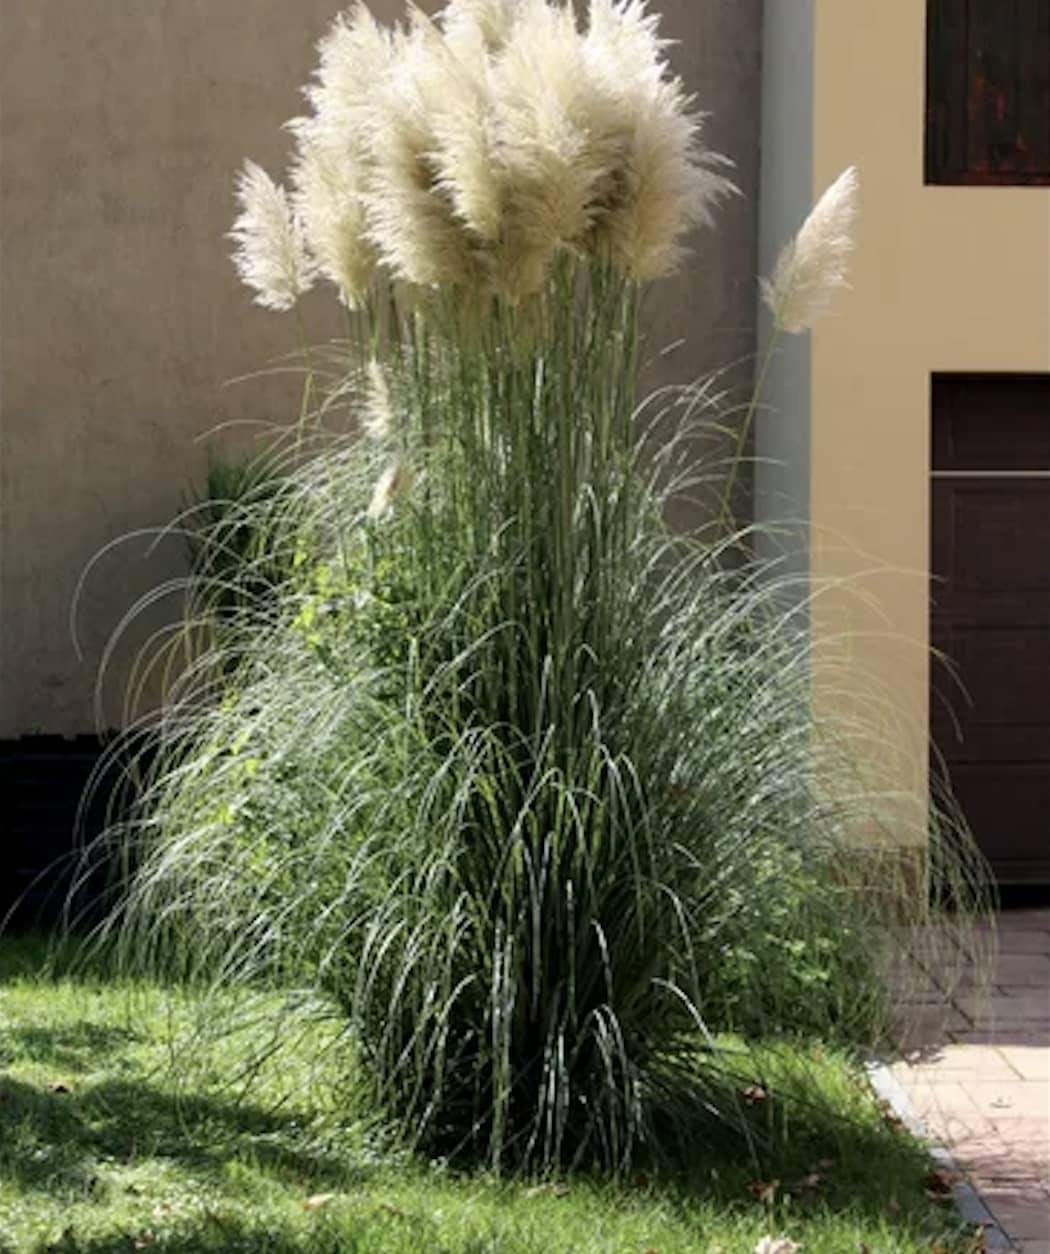 Tall stalks of pampas grass in yard